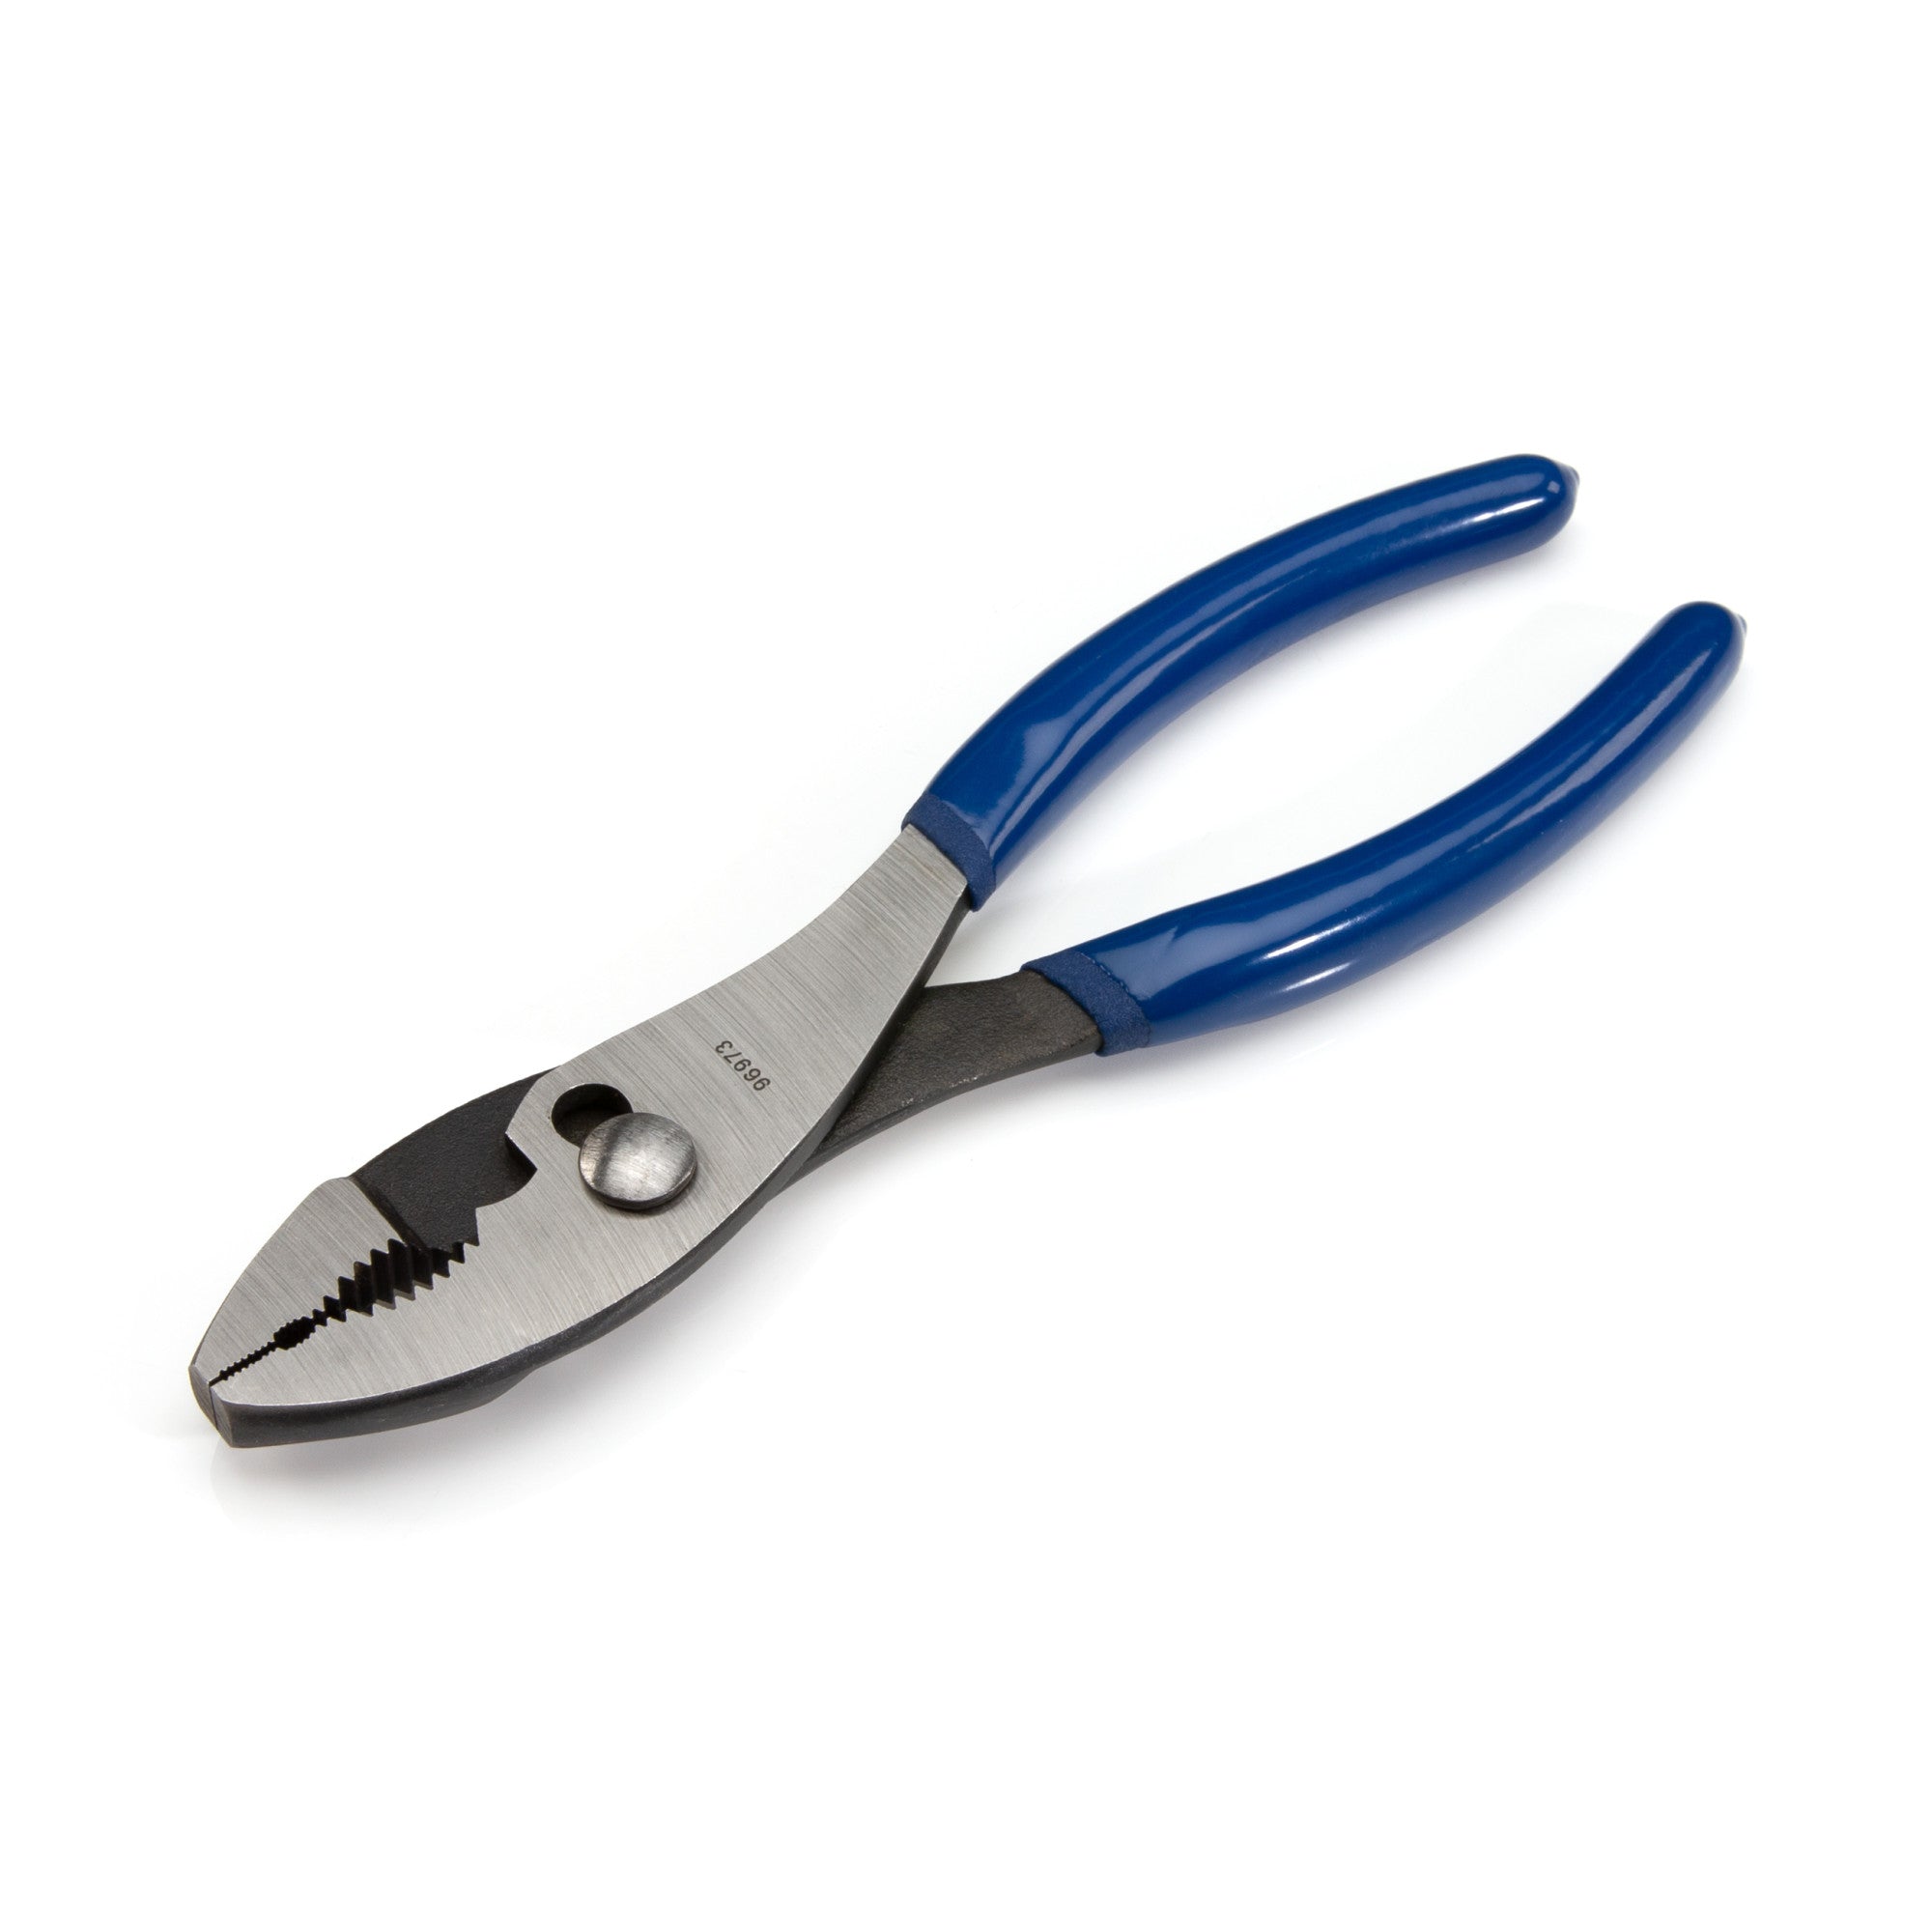 2-1 Combo Dual Material Linesman's Pliers and Wire Stripper